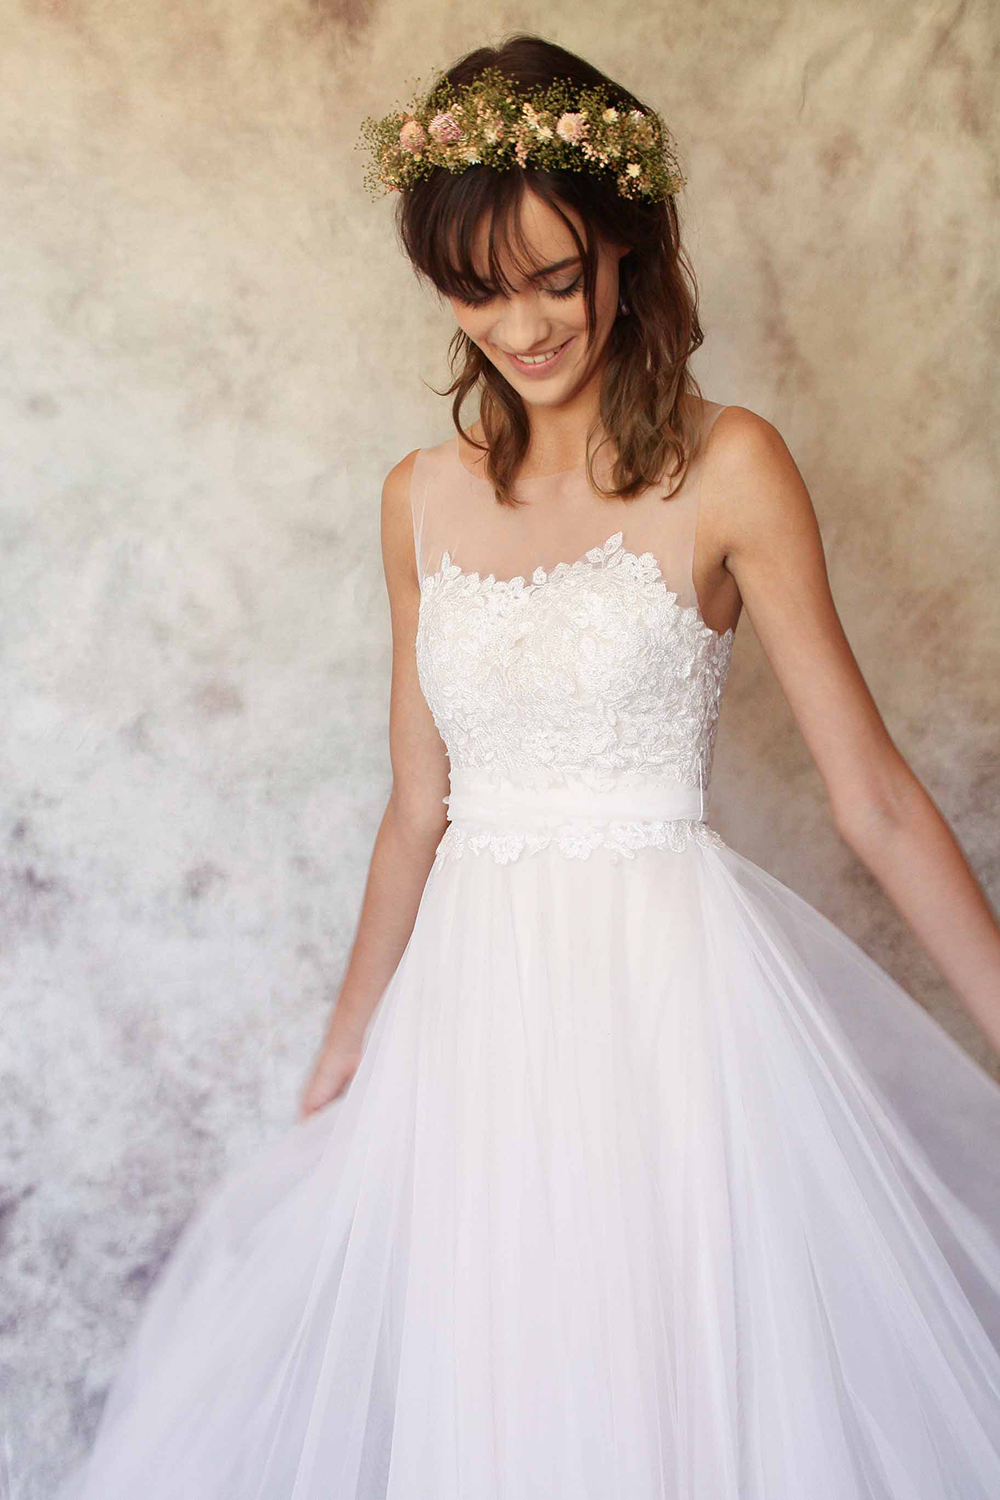 How to choose a wedding dress for your body type